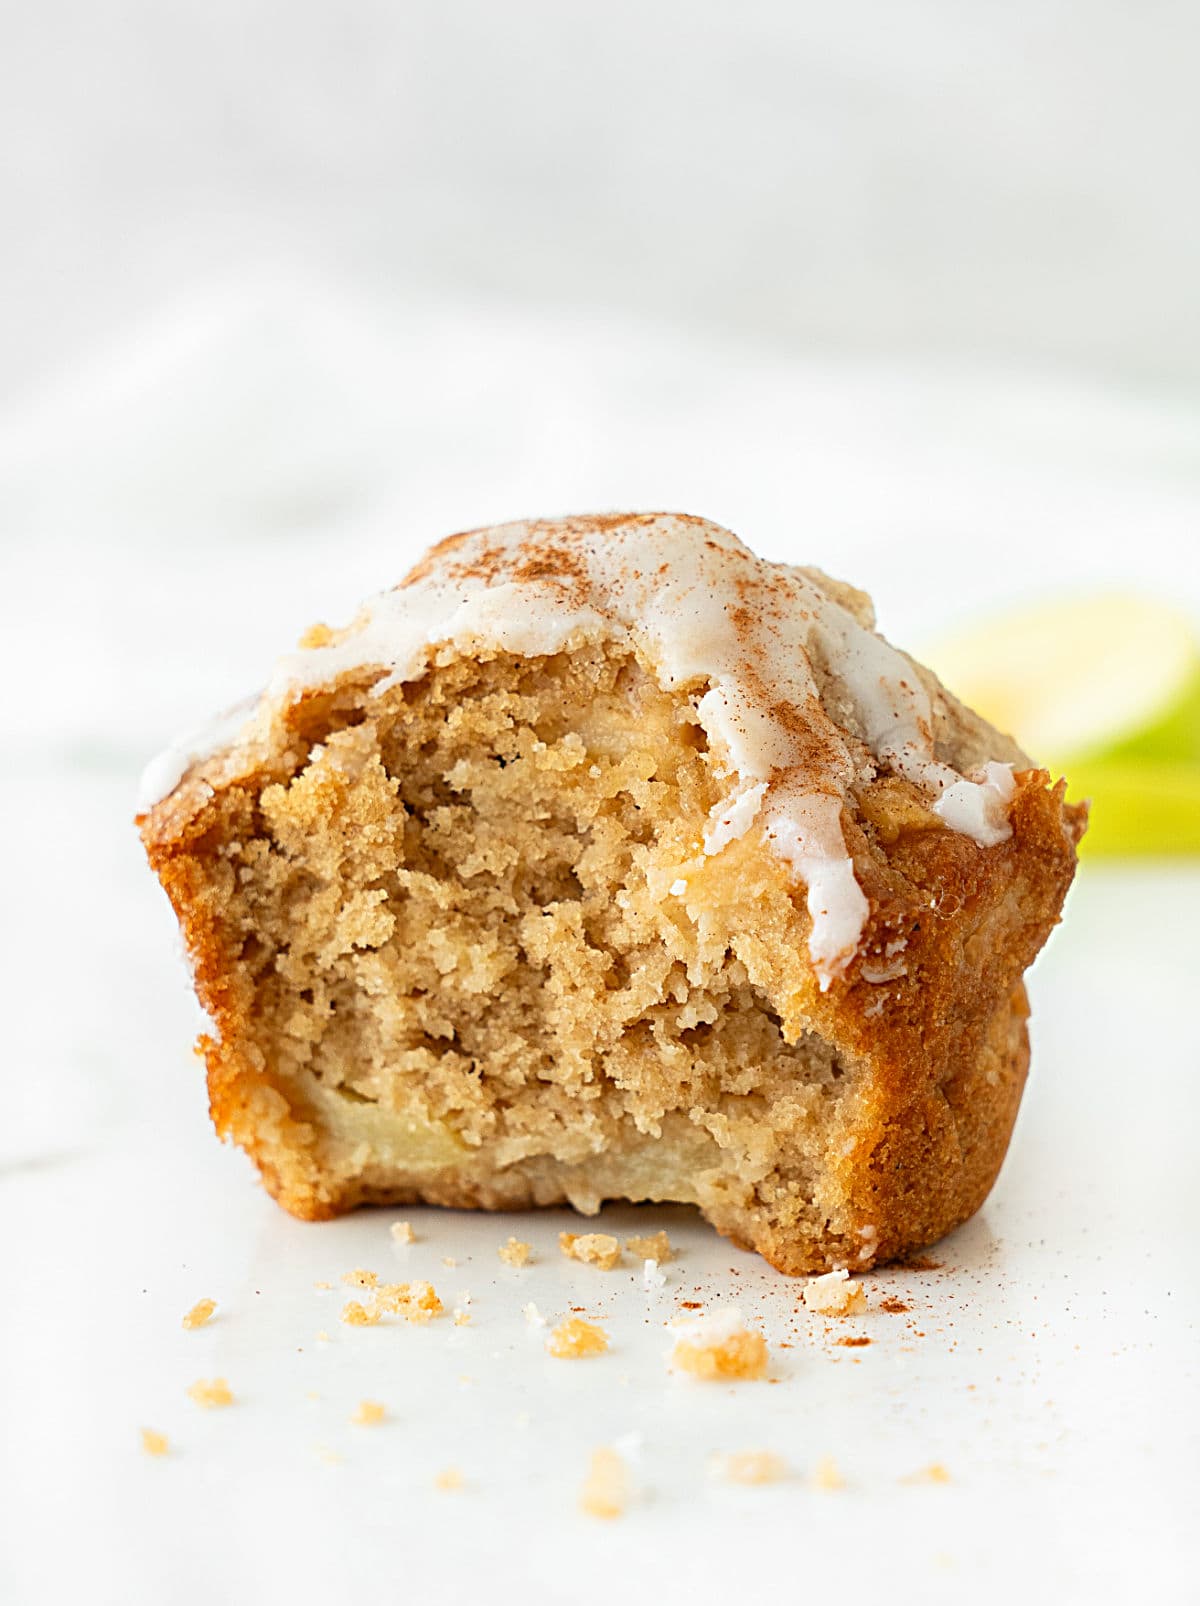 Half eaten apple crumb muffin with glaze on a white background.